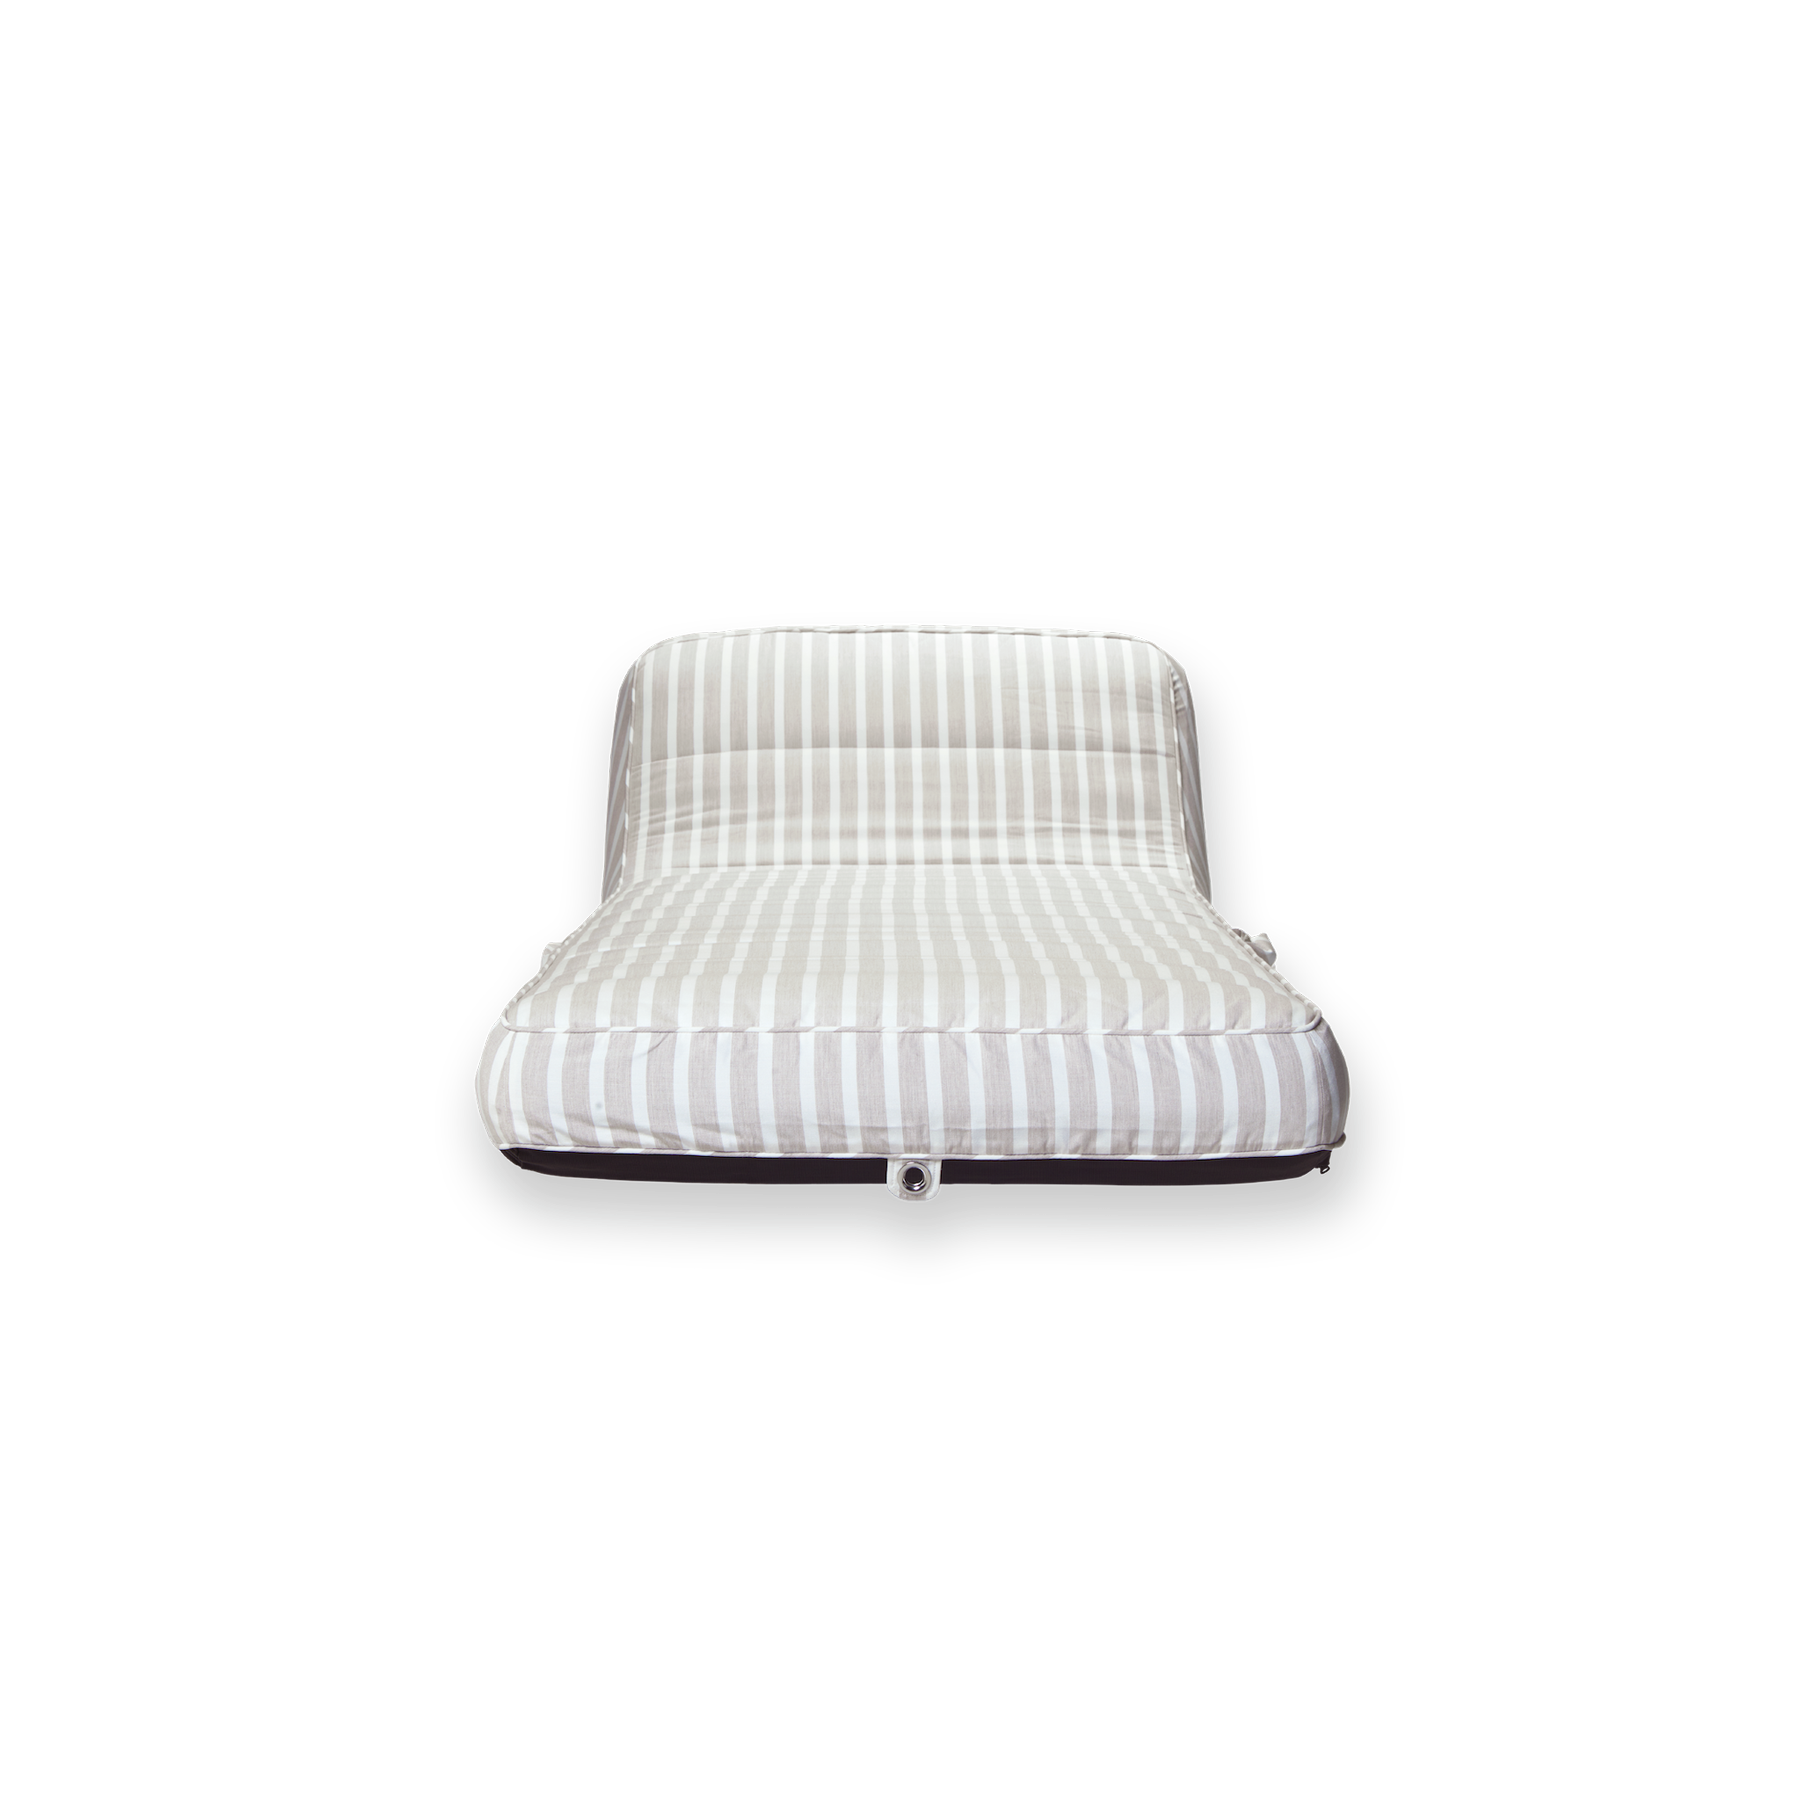 The front profile of a single beige and white striped luxury pool float.